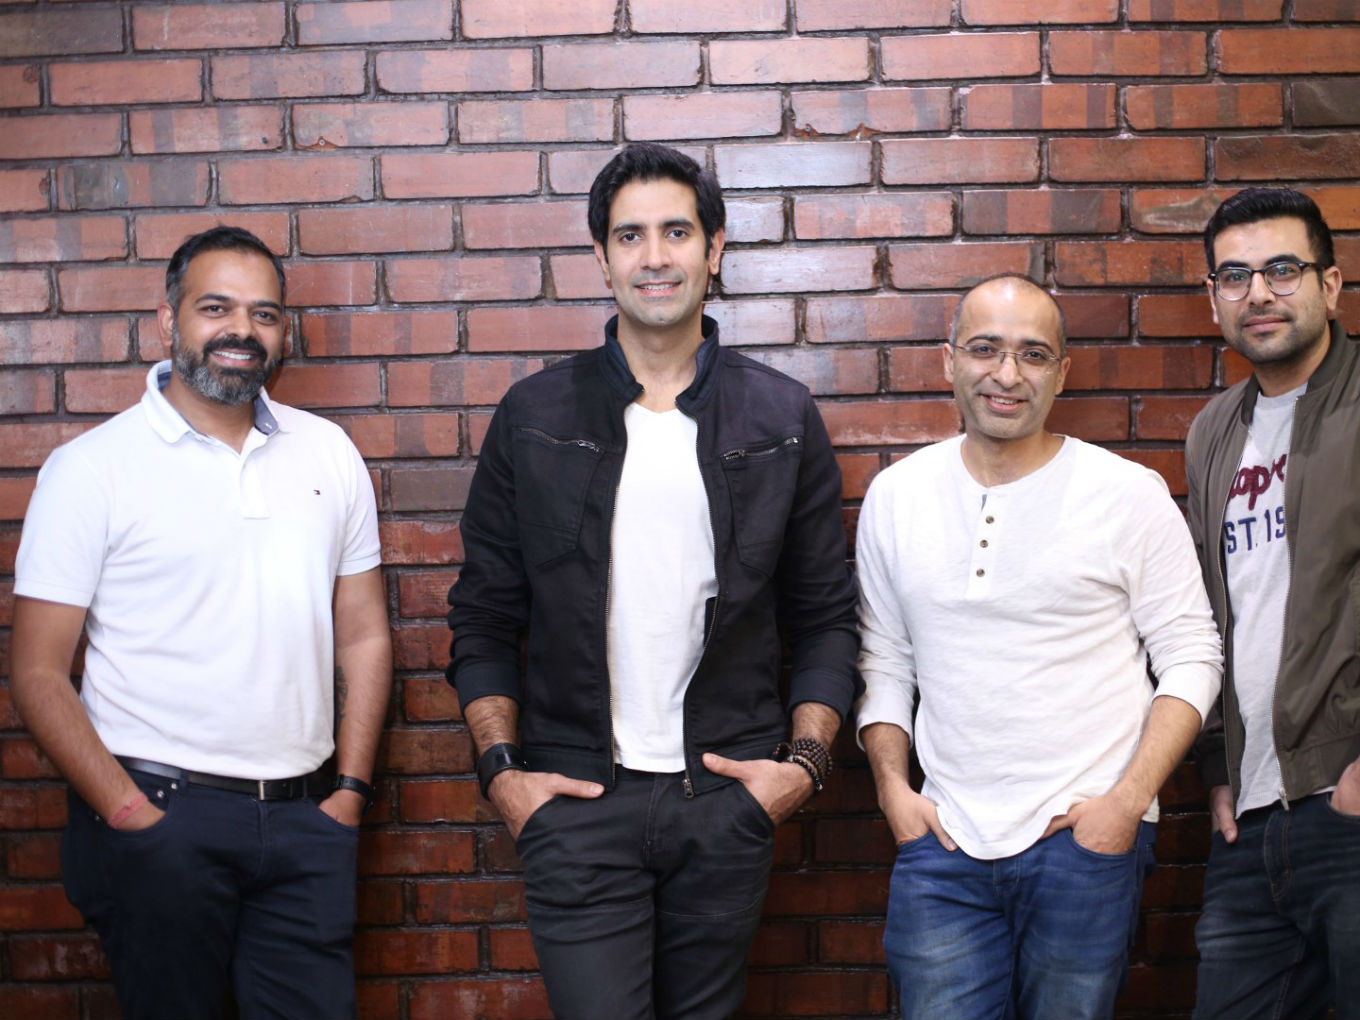 With $600 Mn GTV And 17 Mn Users, Junglee Games Gears Up To Become India’s Next Online Gaming Unicorn